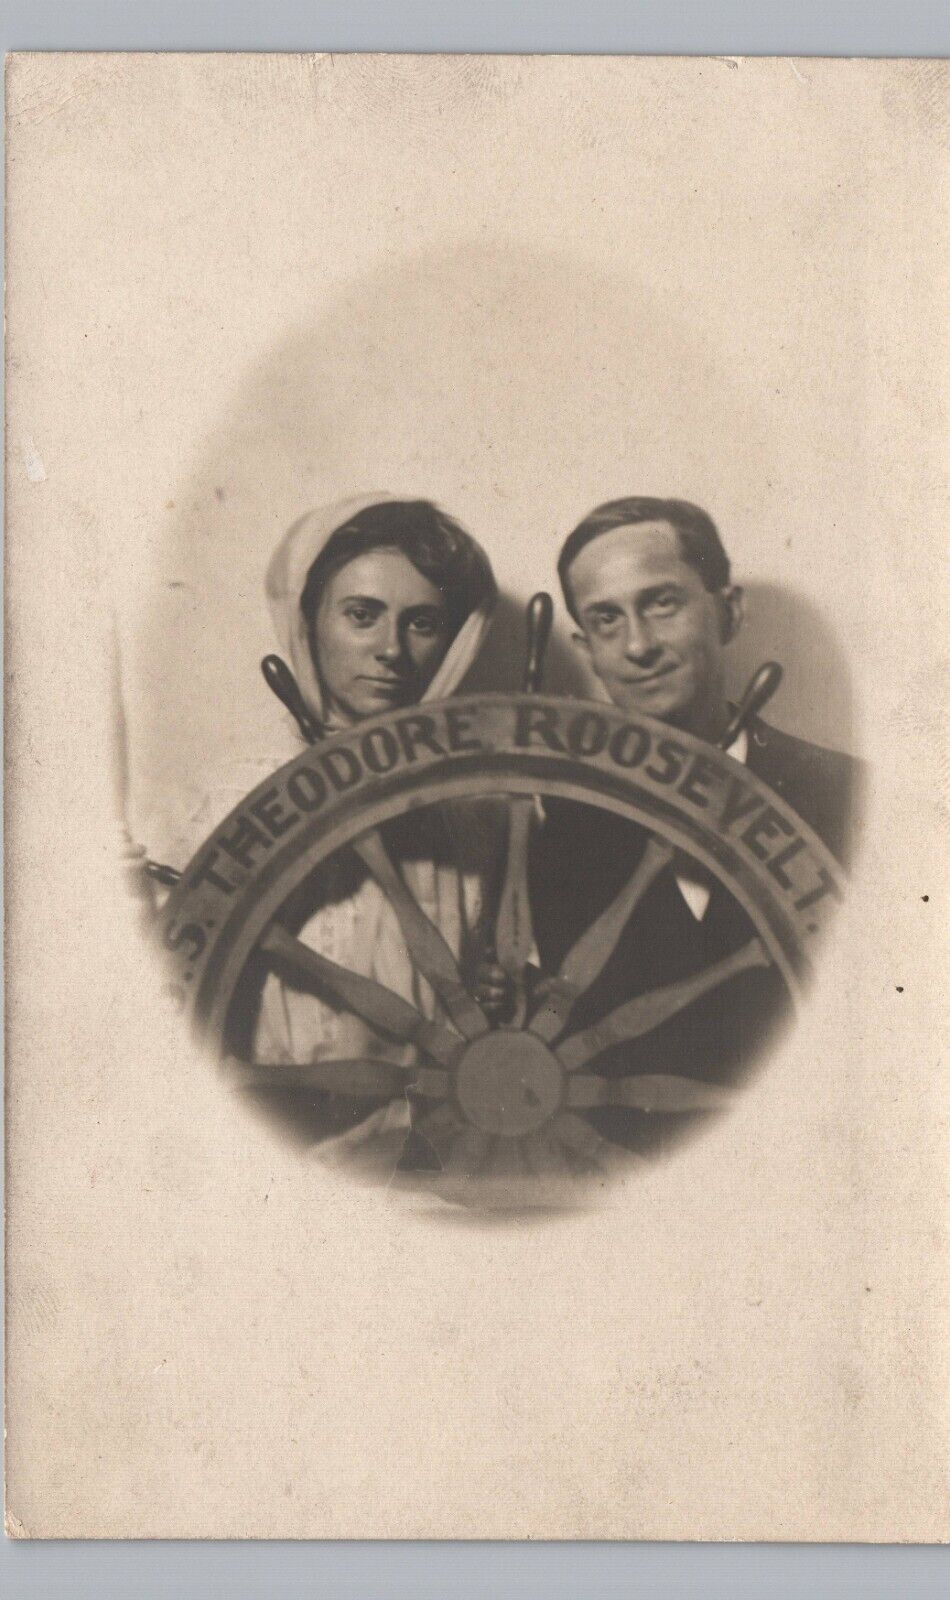 SS THEODORE ROOSEVELT STEAMSHIP WHEEL c1910 real photo postcard rppc great lakes